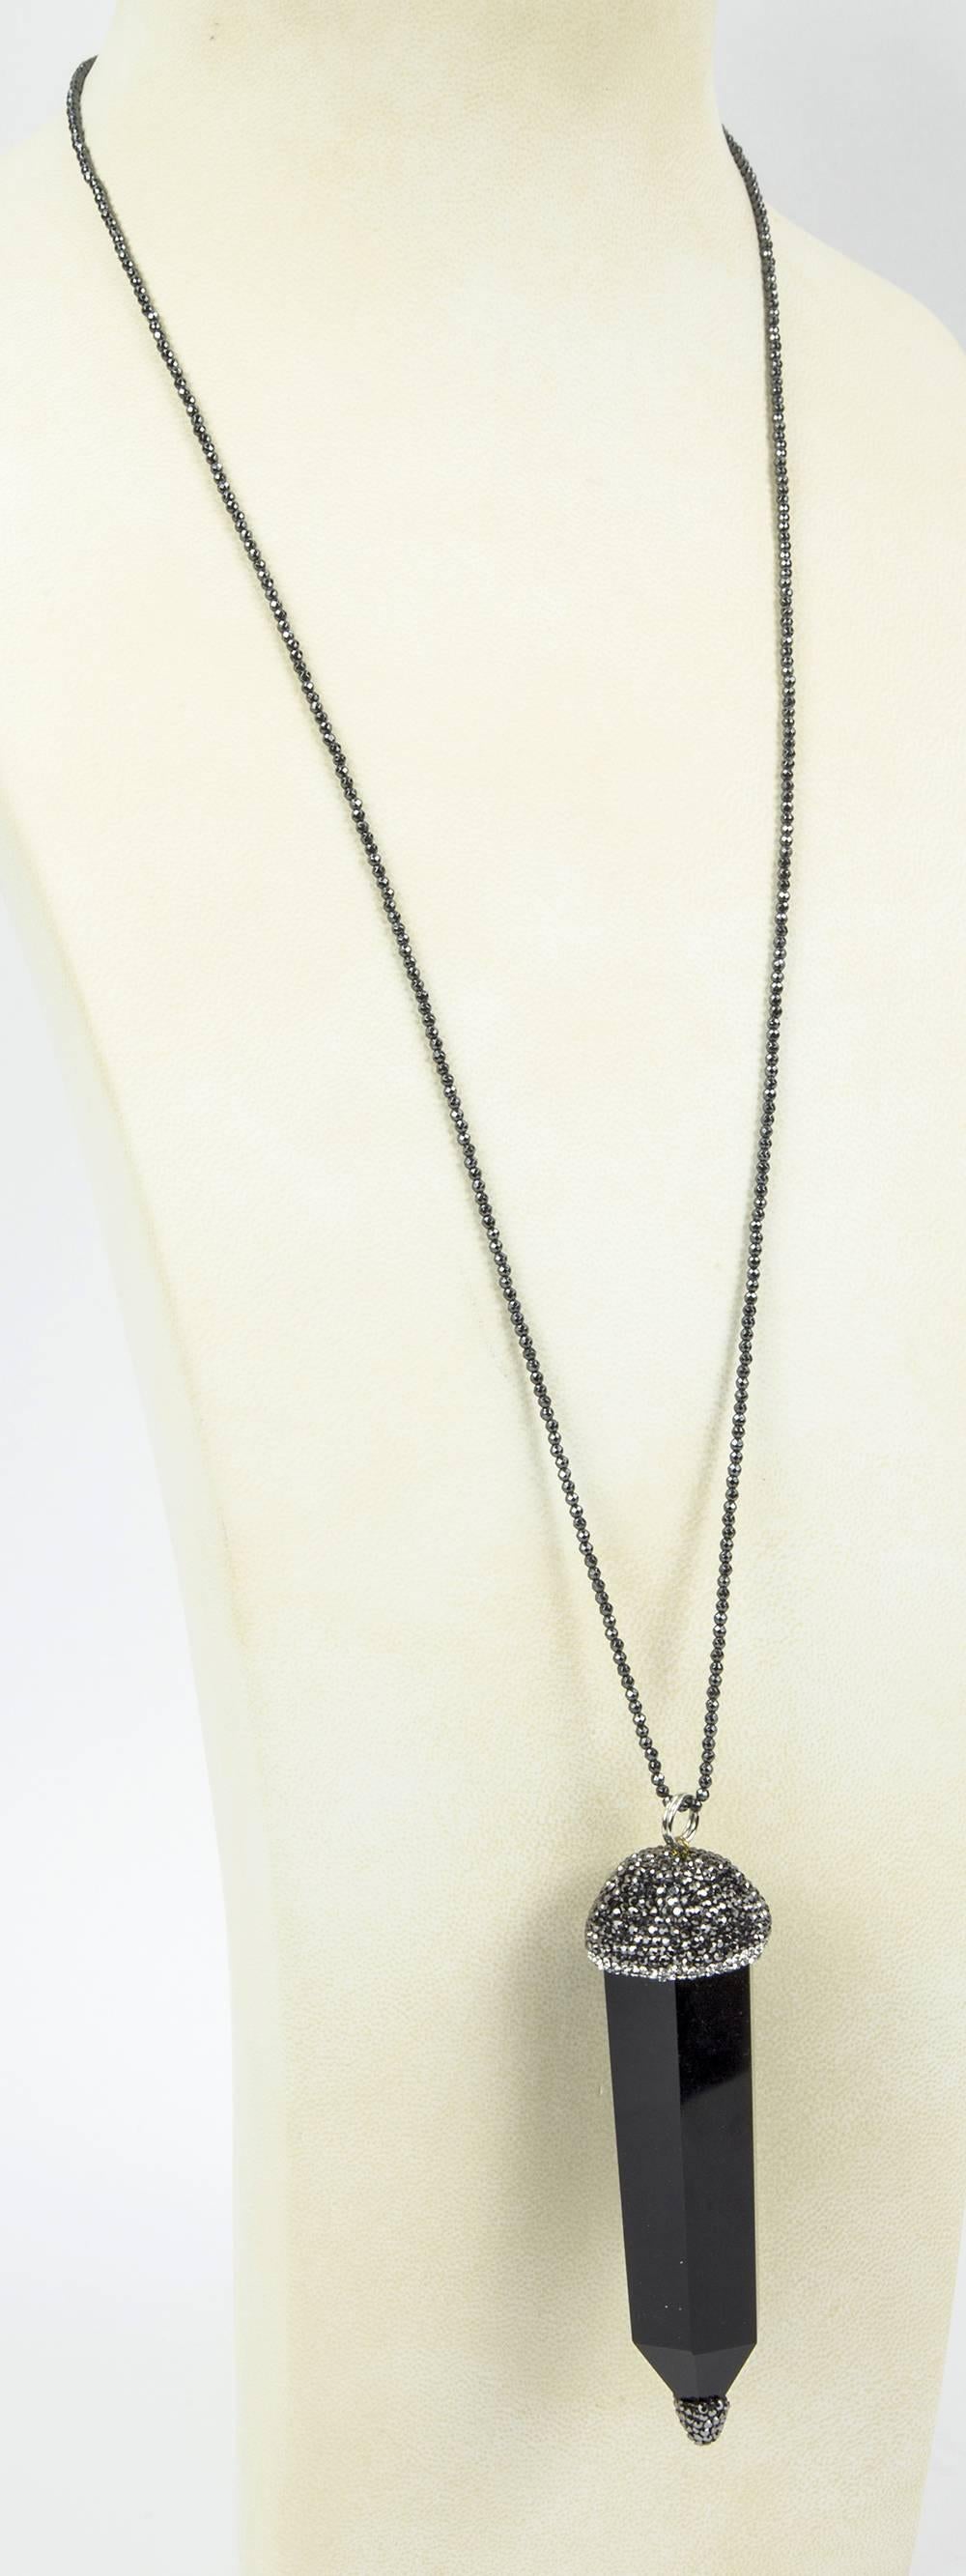 Exquisite Deco-inspired drop necklace, featuring an elongated faceted Onyx Crystal silhouette pendant embellished with sparkling pave set Hematite and CZ top and bottom, suspended from a hematite necklace approx.  32